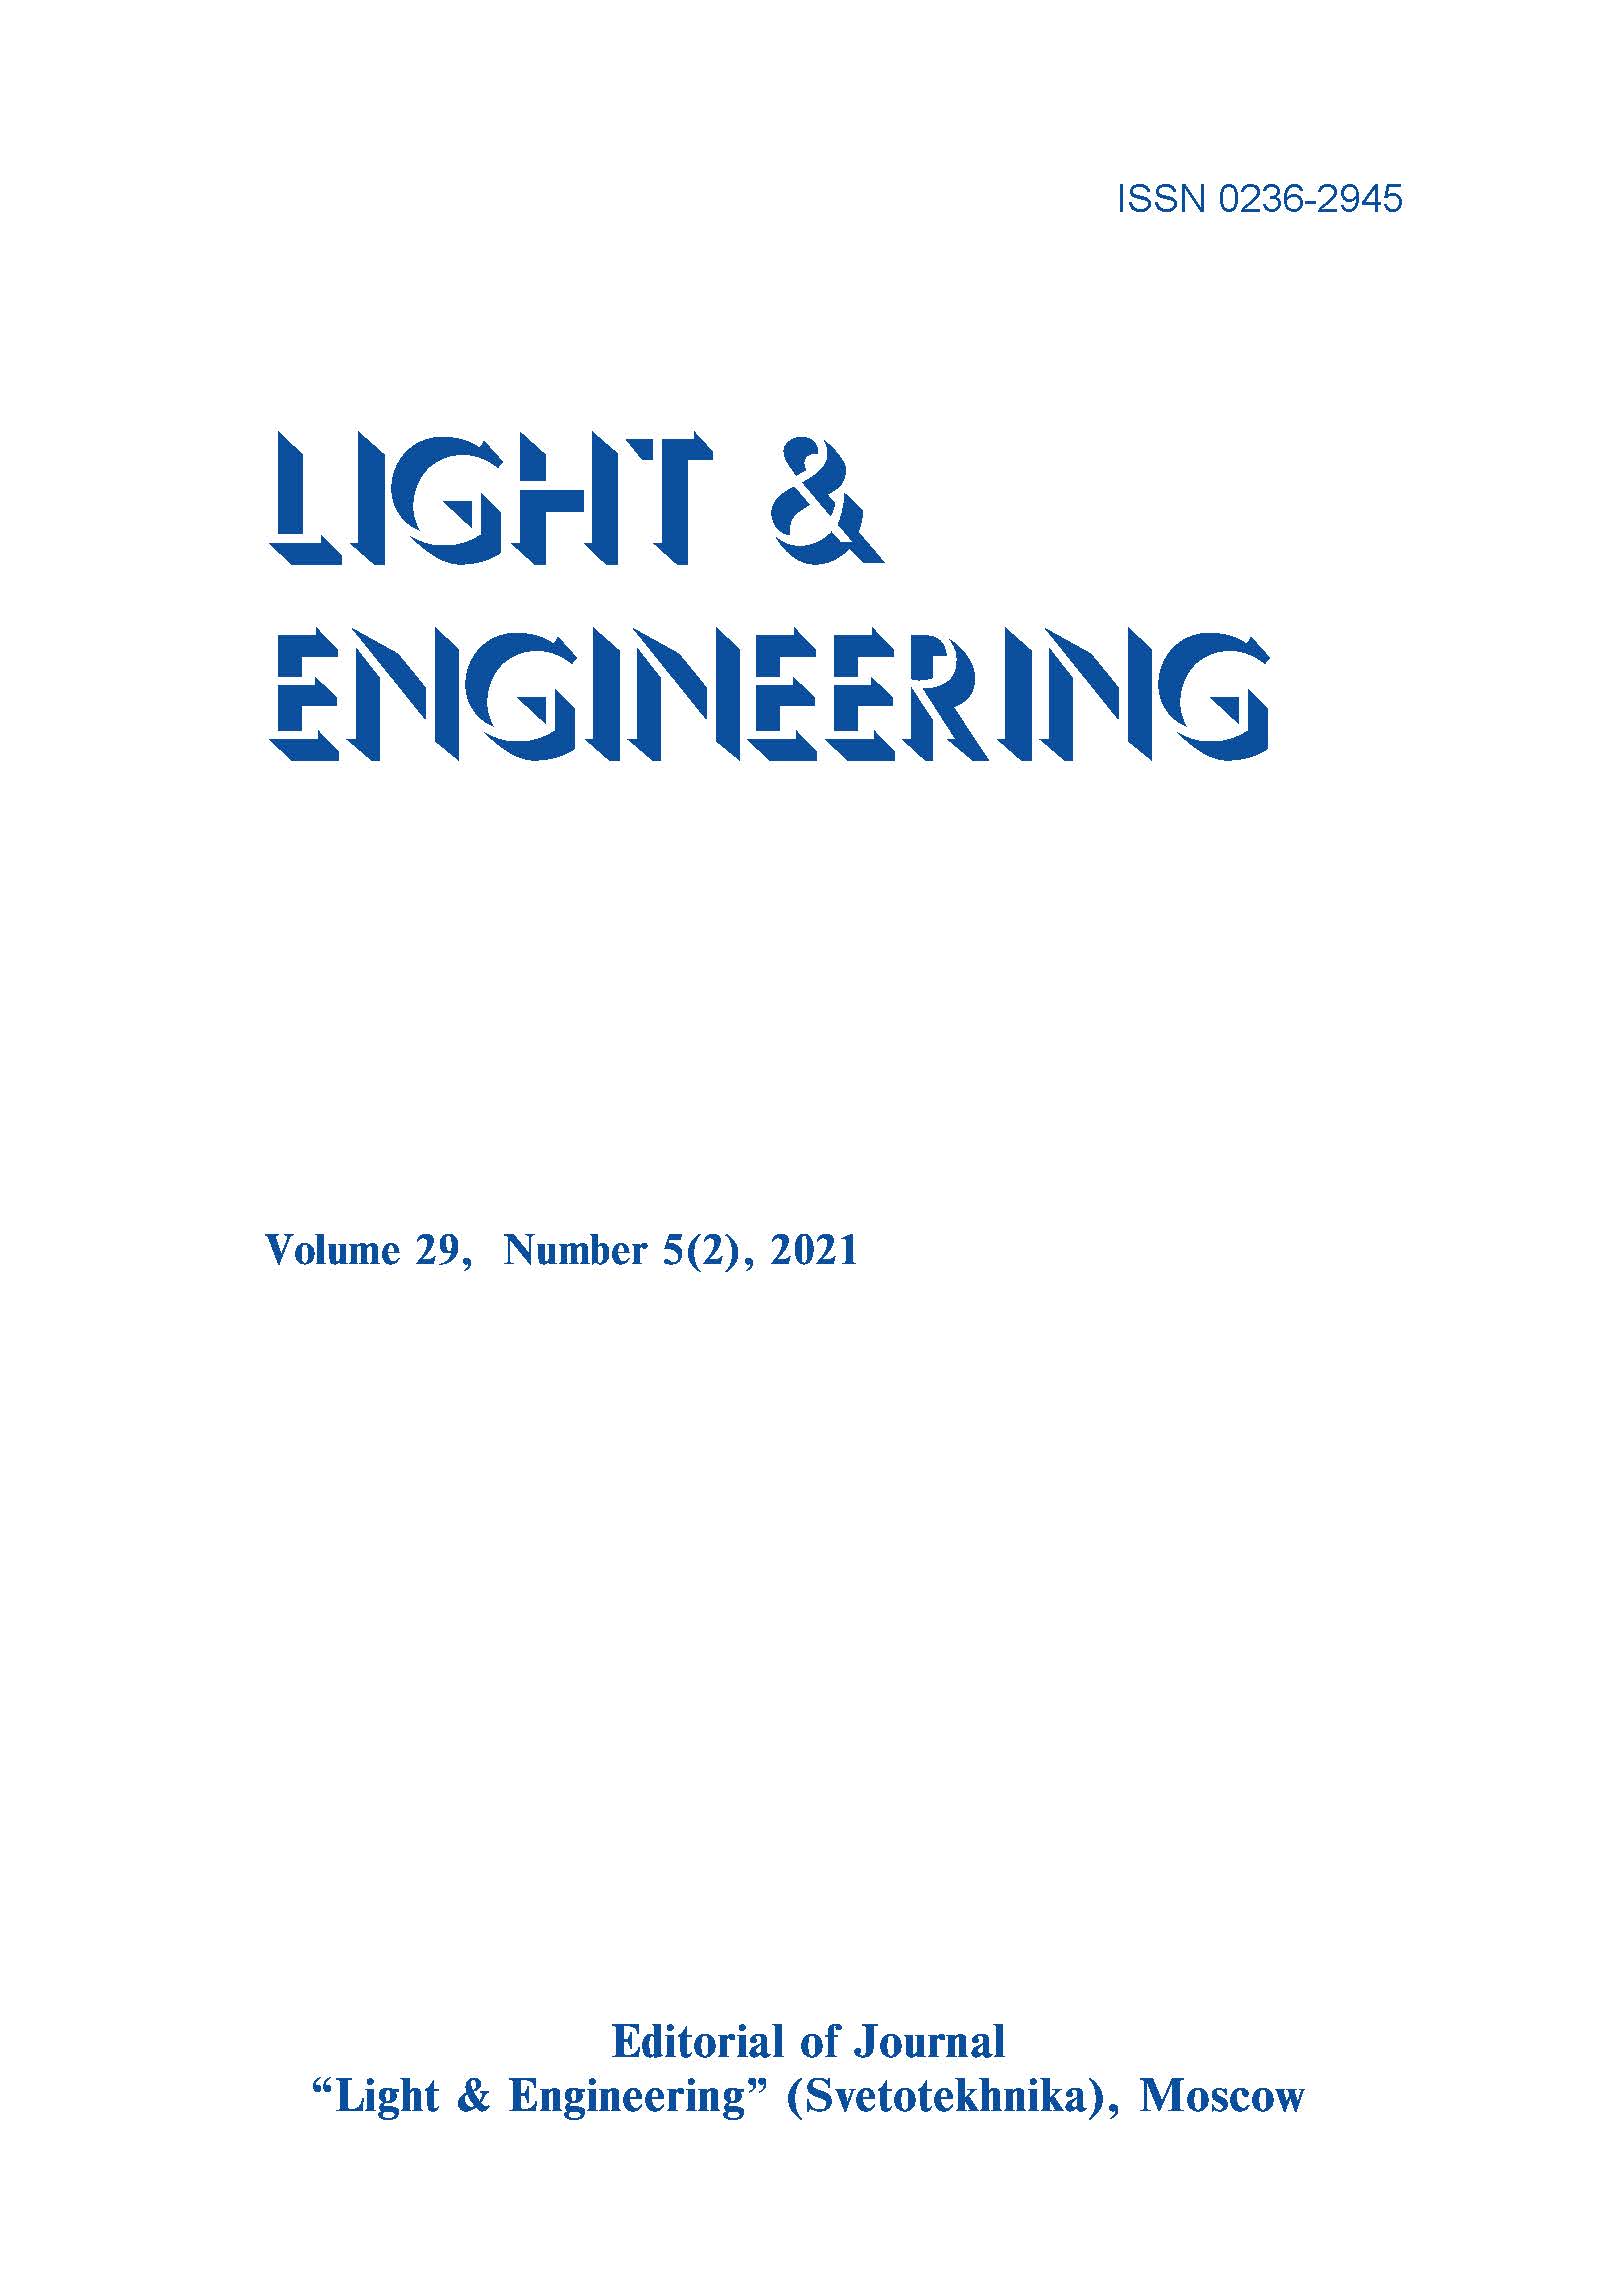 Approaches to the Assessment and Regulation of Daylighting in Residential and Public Buildings in Russia and Abroad L&E, Vol. 29, No. 5 (2), 2021